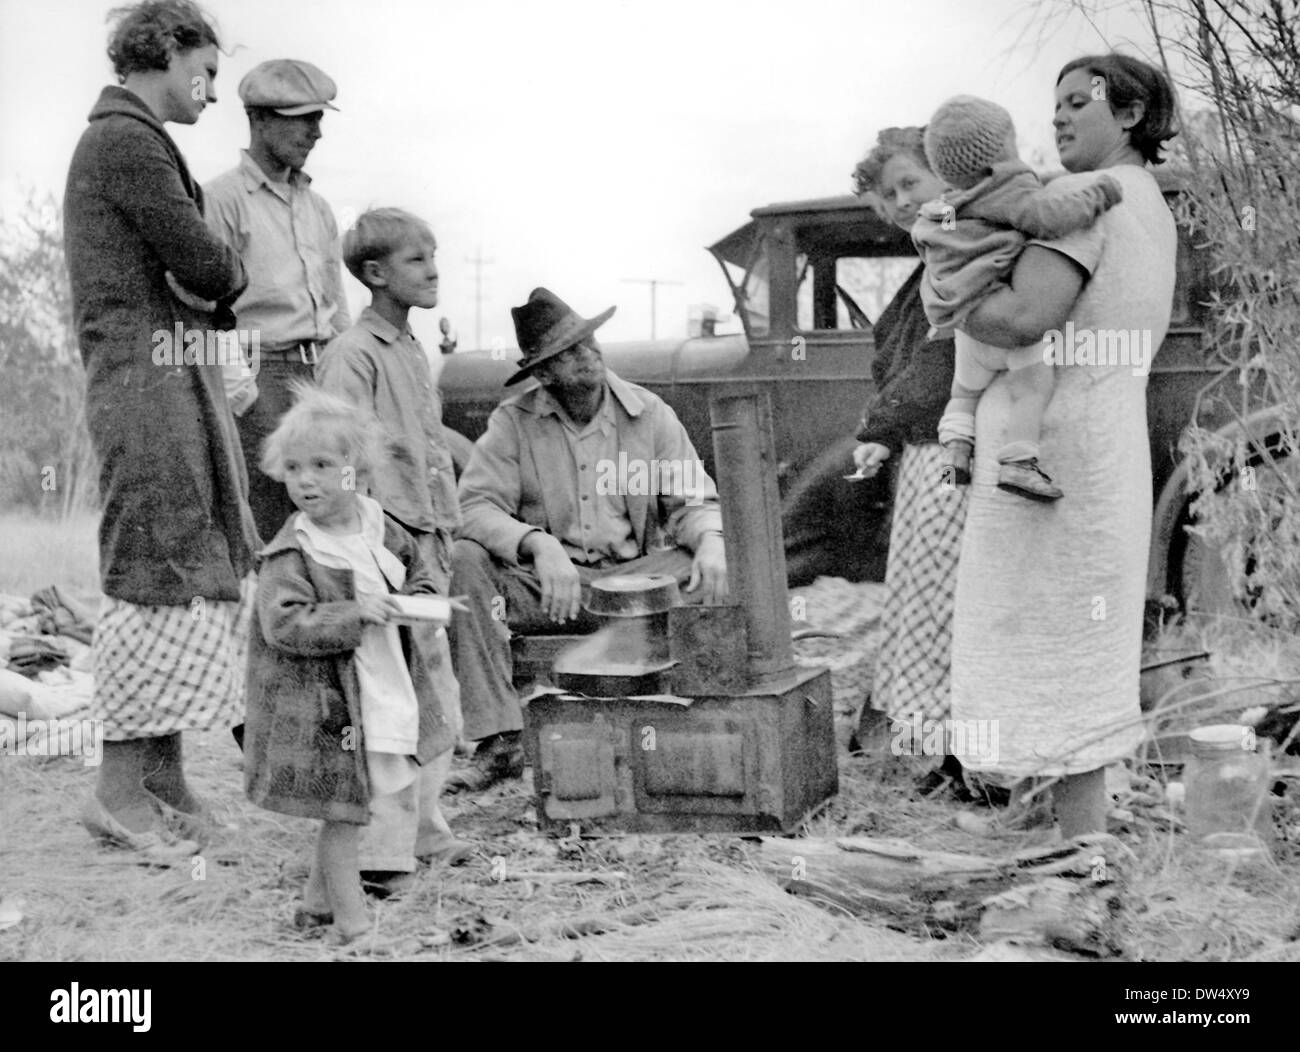 AMERICAN DUSTBOWL families about 1935 Stock Photo: 67106461 - Alamy